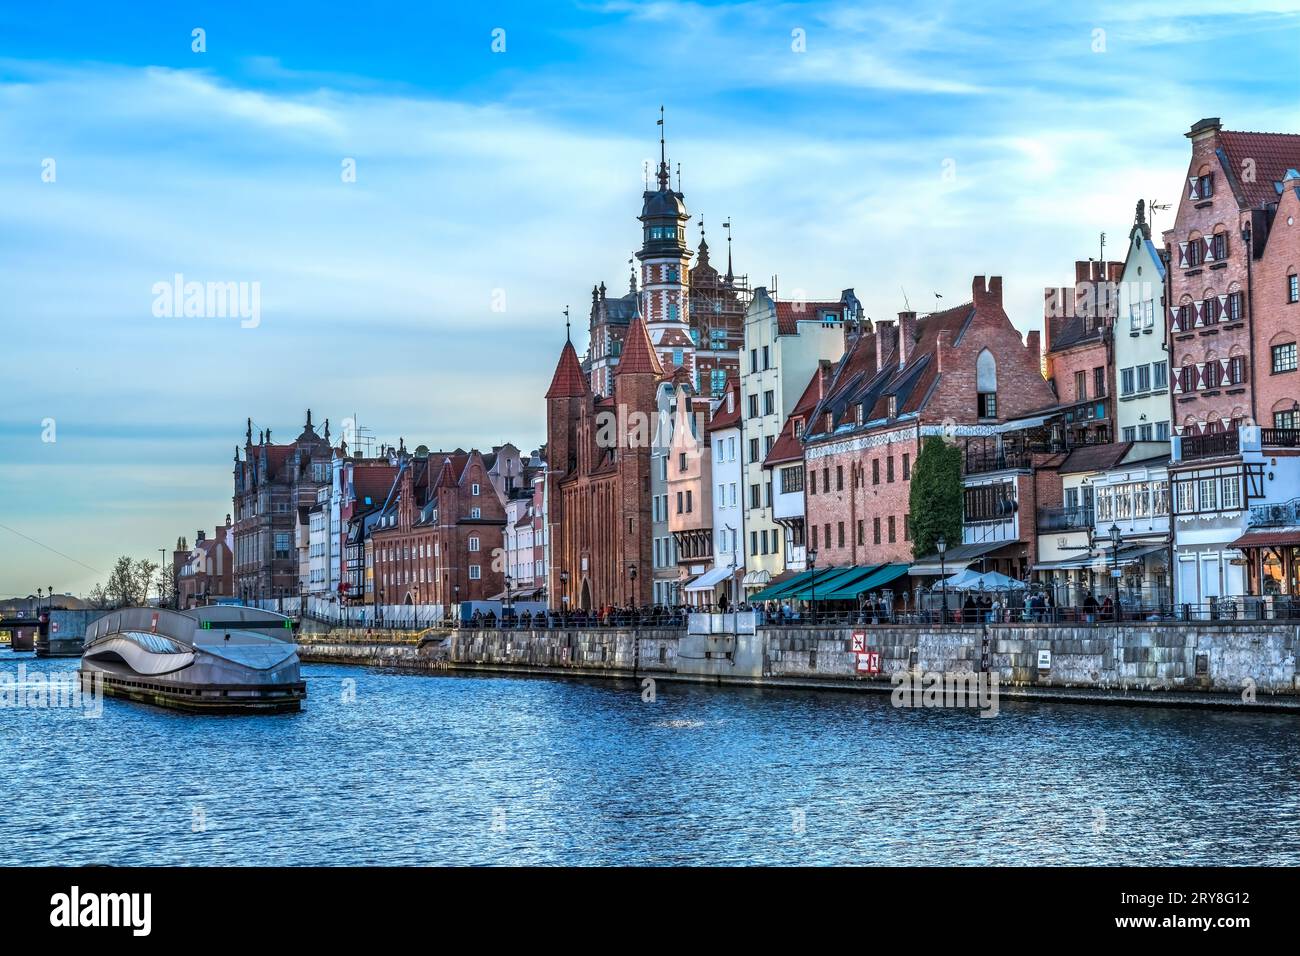 Colorful Boat Inner Harbor Port Motlawa River Historic Old Town of Gdansk Poland. City formerly known as Danzig. Stock Photo